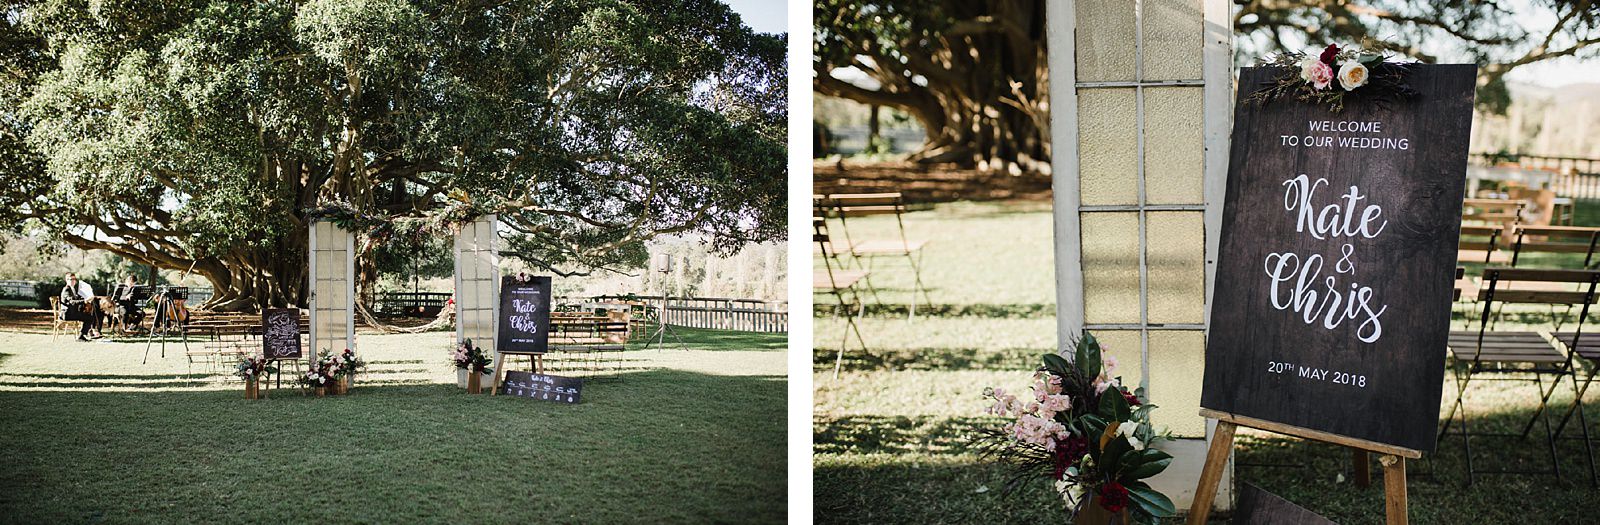 033Hunter Valley Wedding Photographers Bryce Noone Photography at Tocal Homestead Wedding Venue.jpg